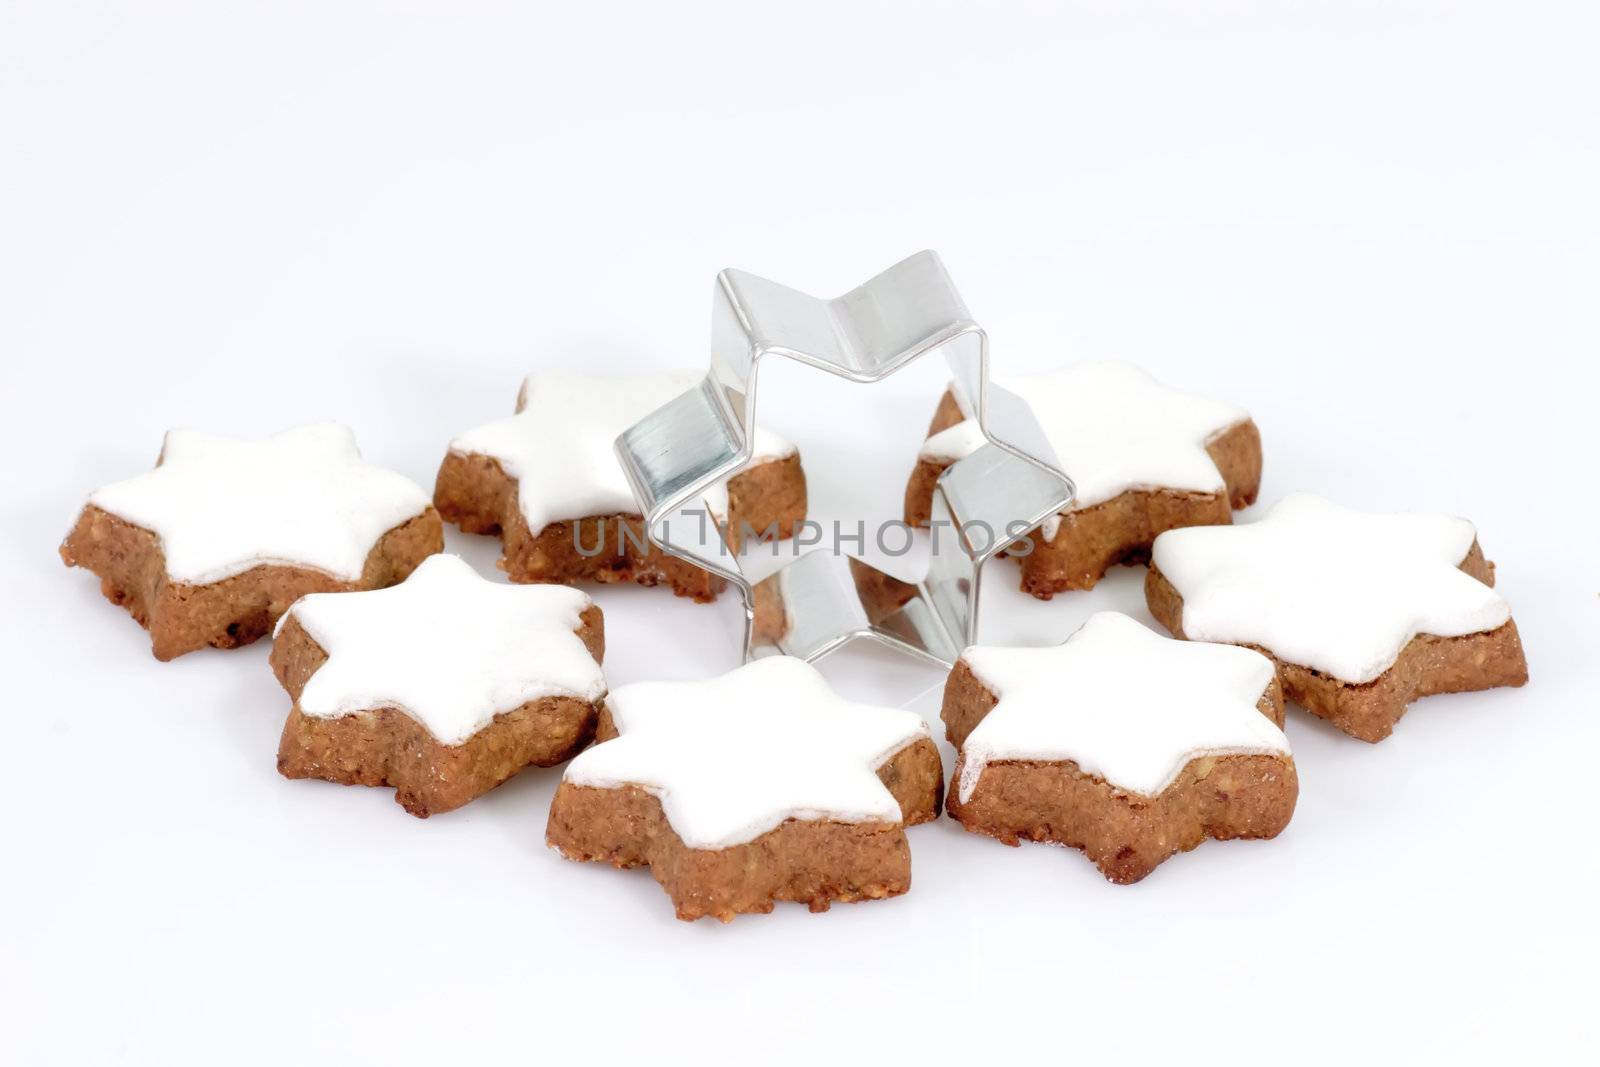 Cinnamon Cookies With Cutter by Teamarbeit